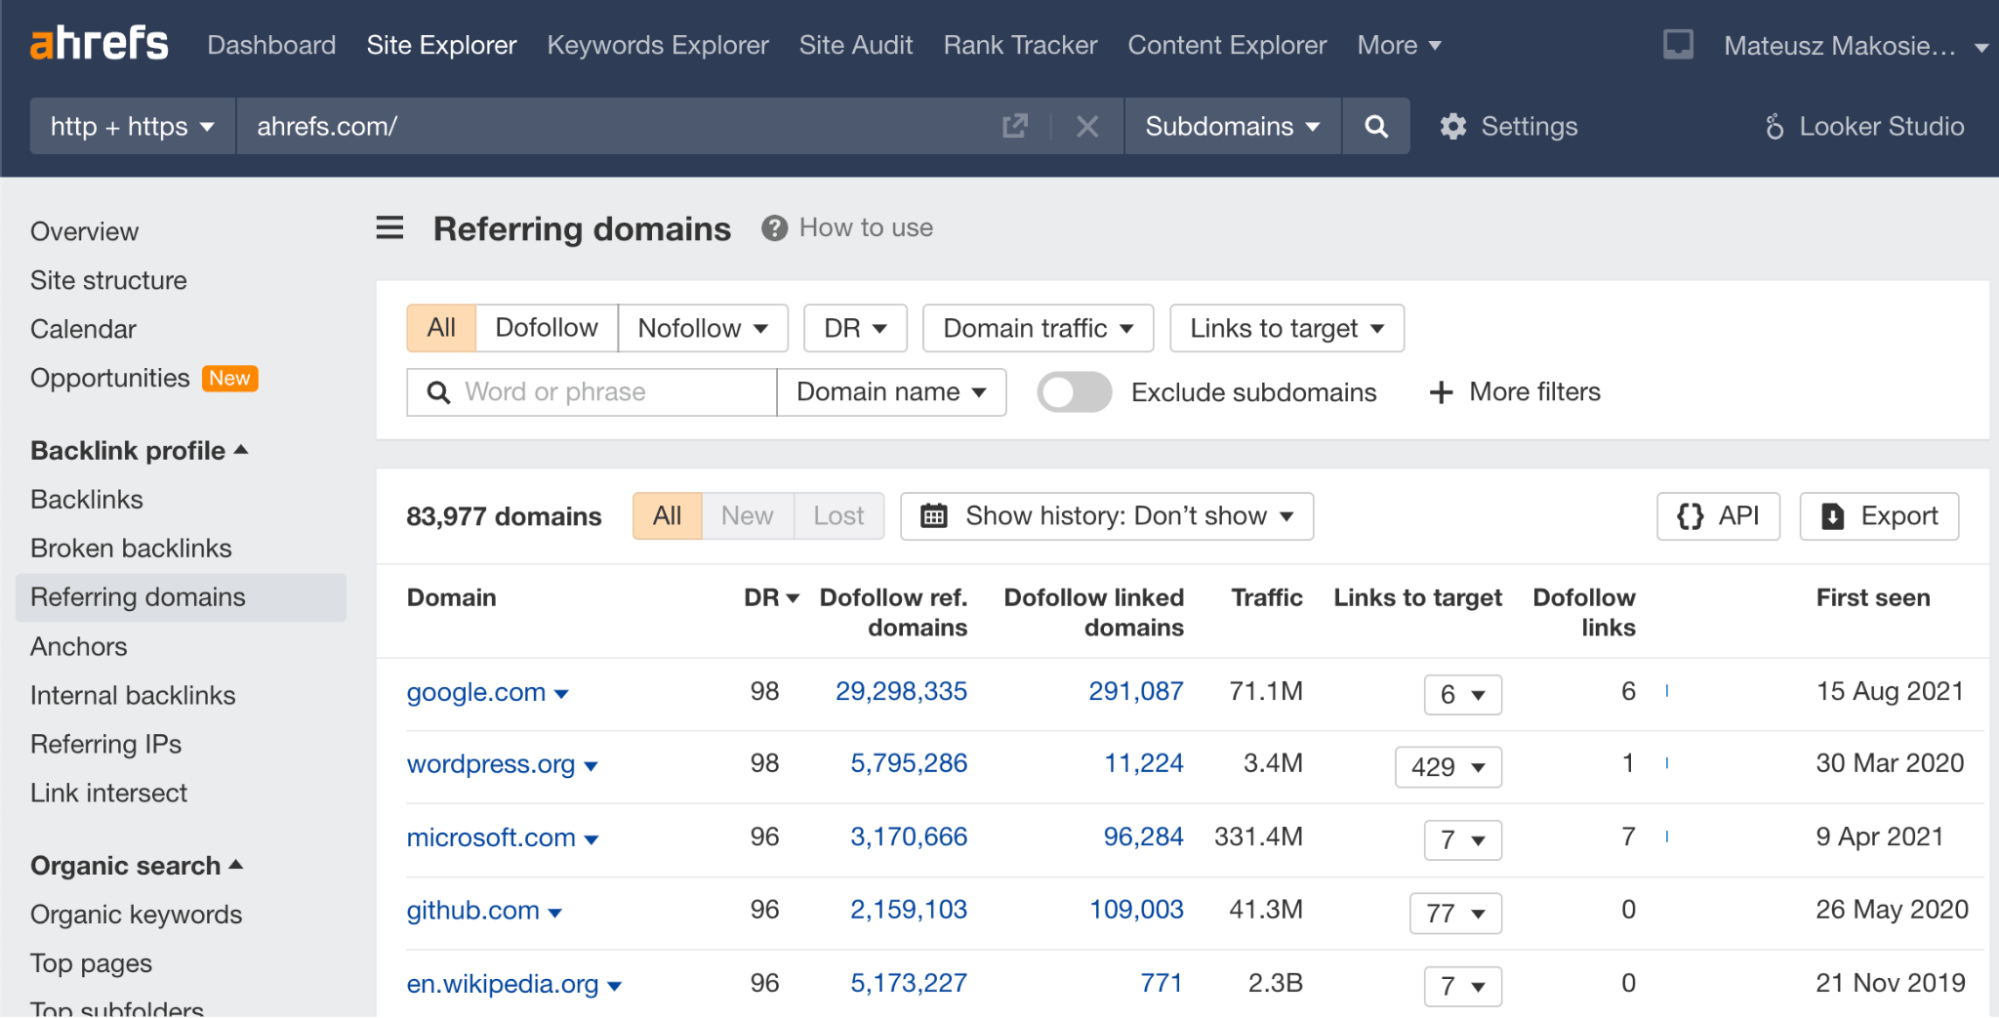 Referring domains report in Ahrefs Webmaster Tools